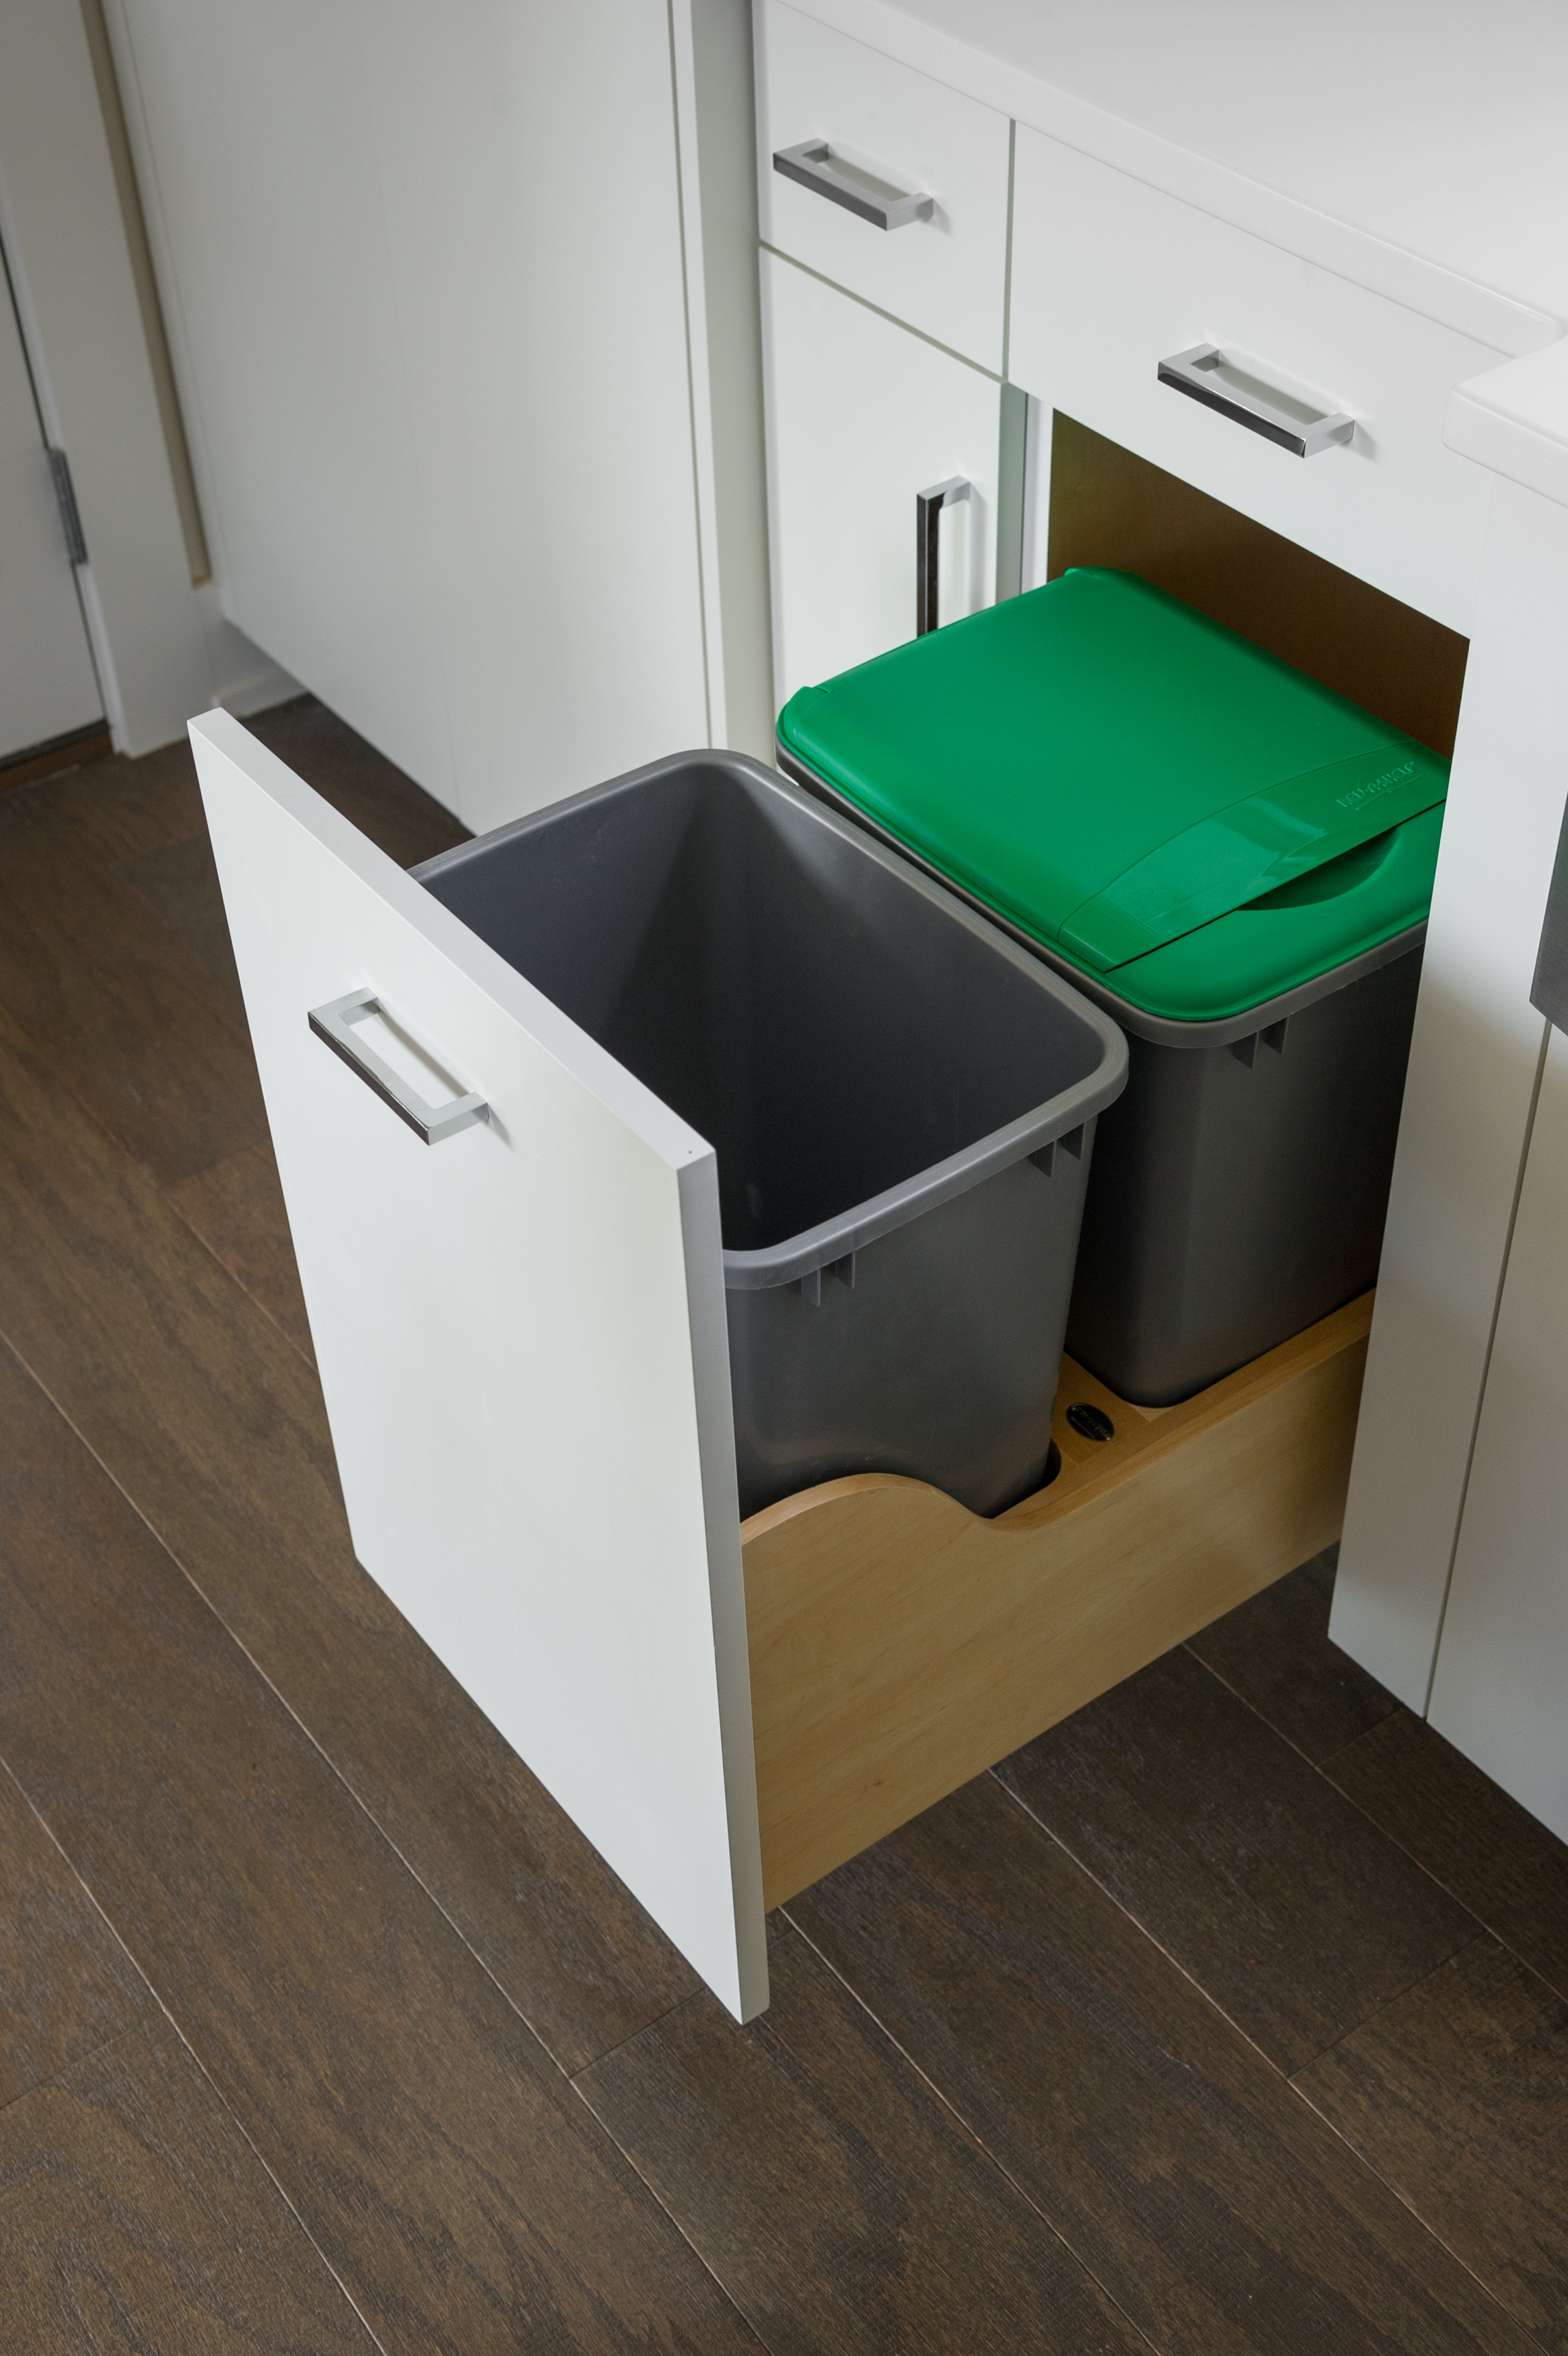 download recycling bins for kitchen